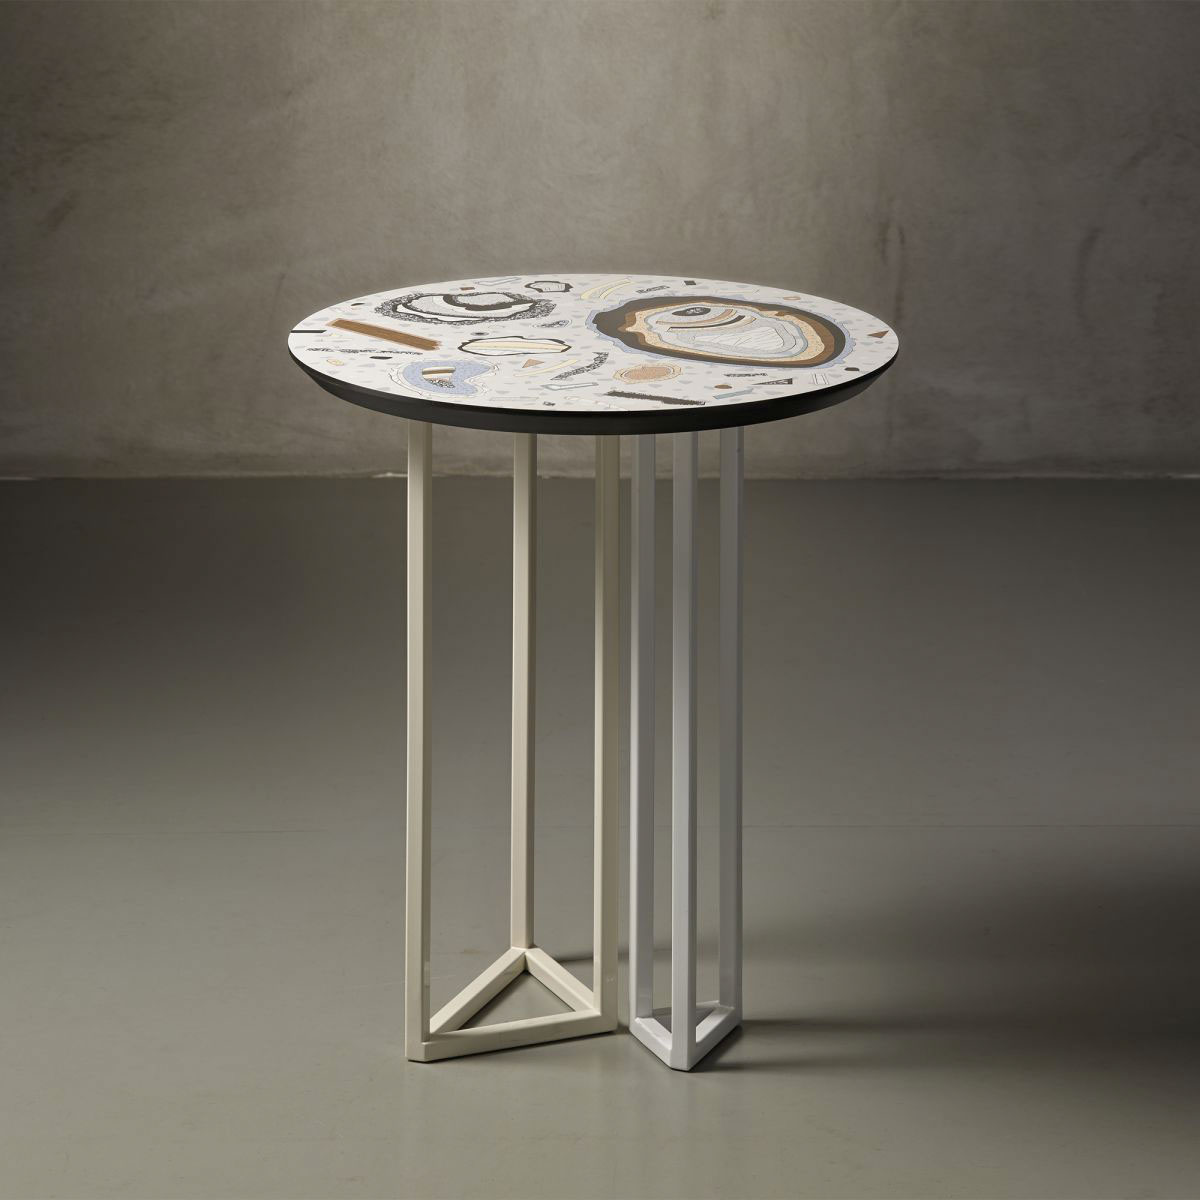 Moon Rock collection – Moon E low table Bethan Laura Wood pic-1